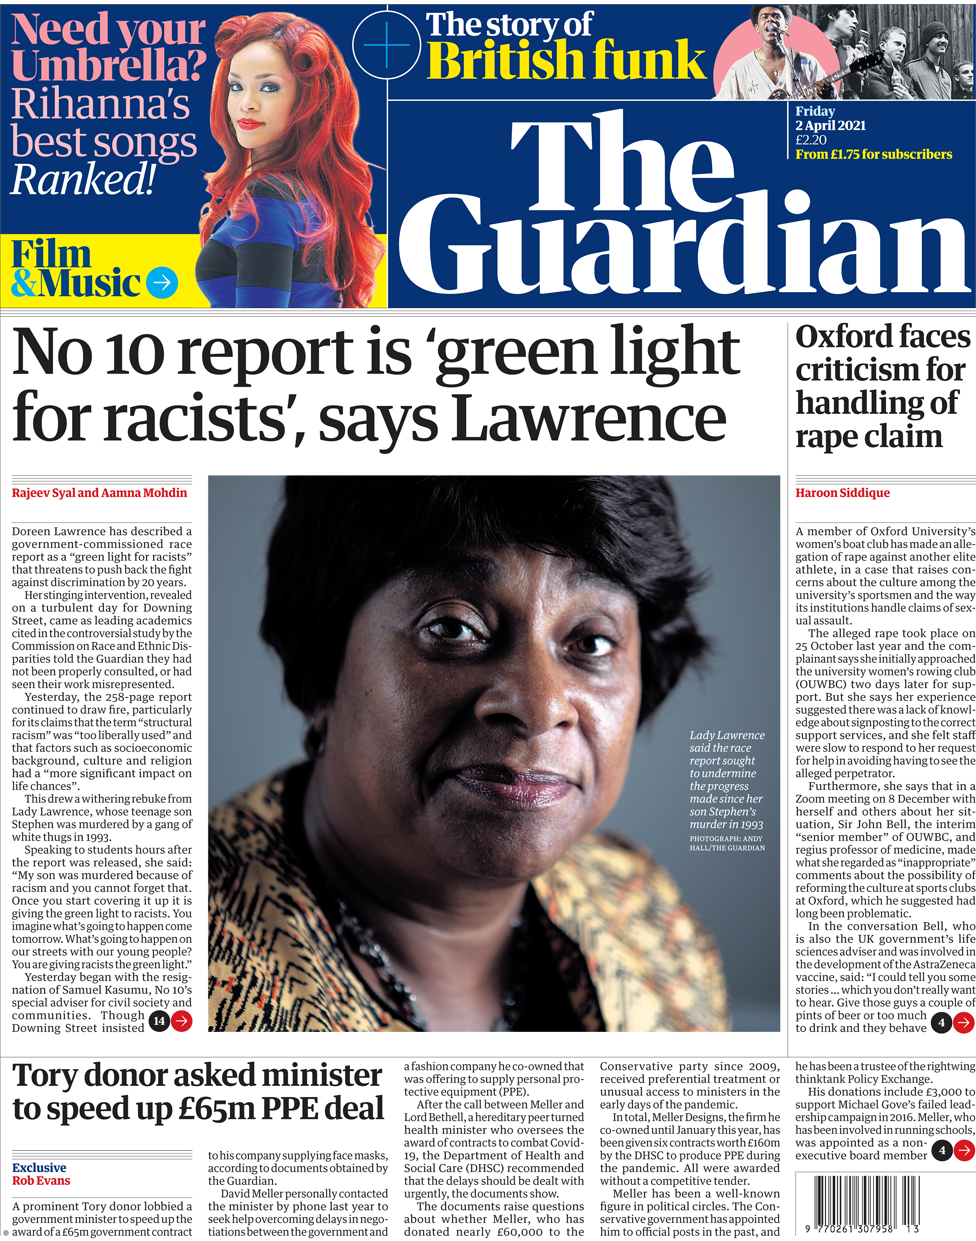 The Guardian front page 2 April 2021